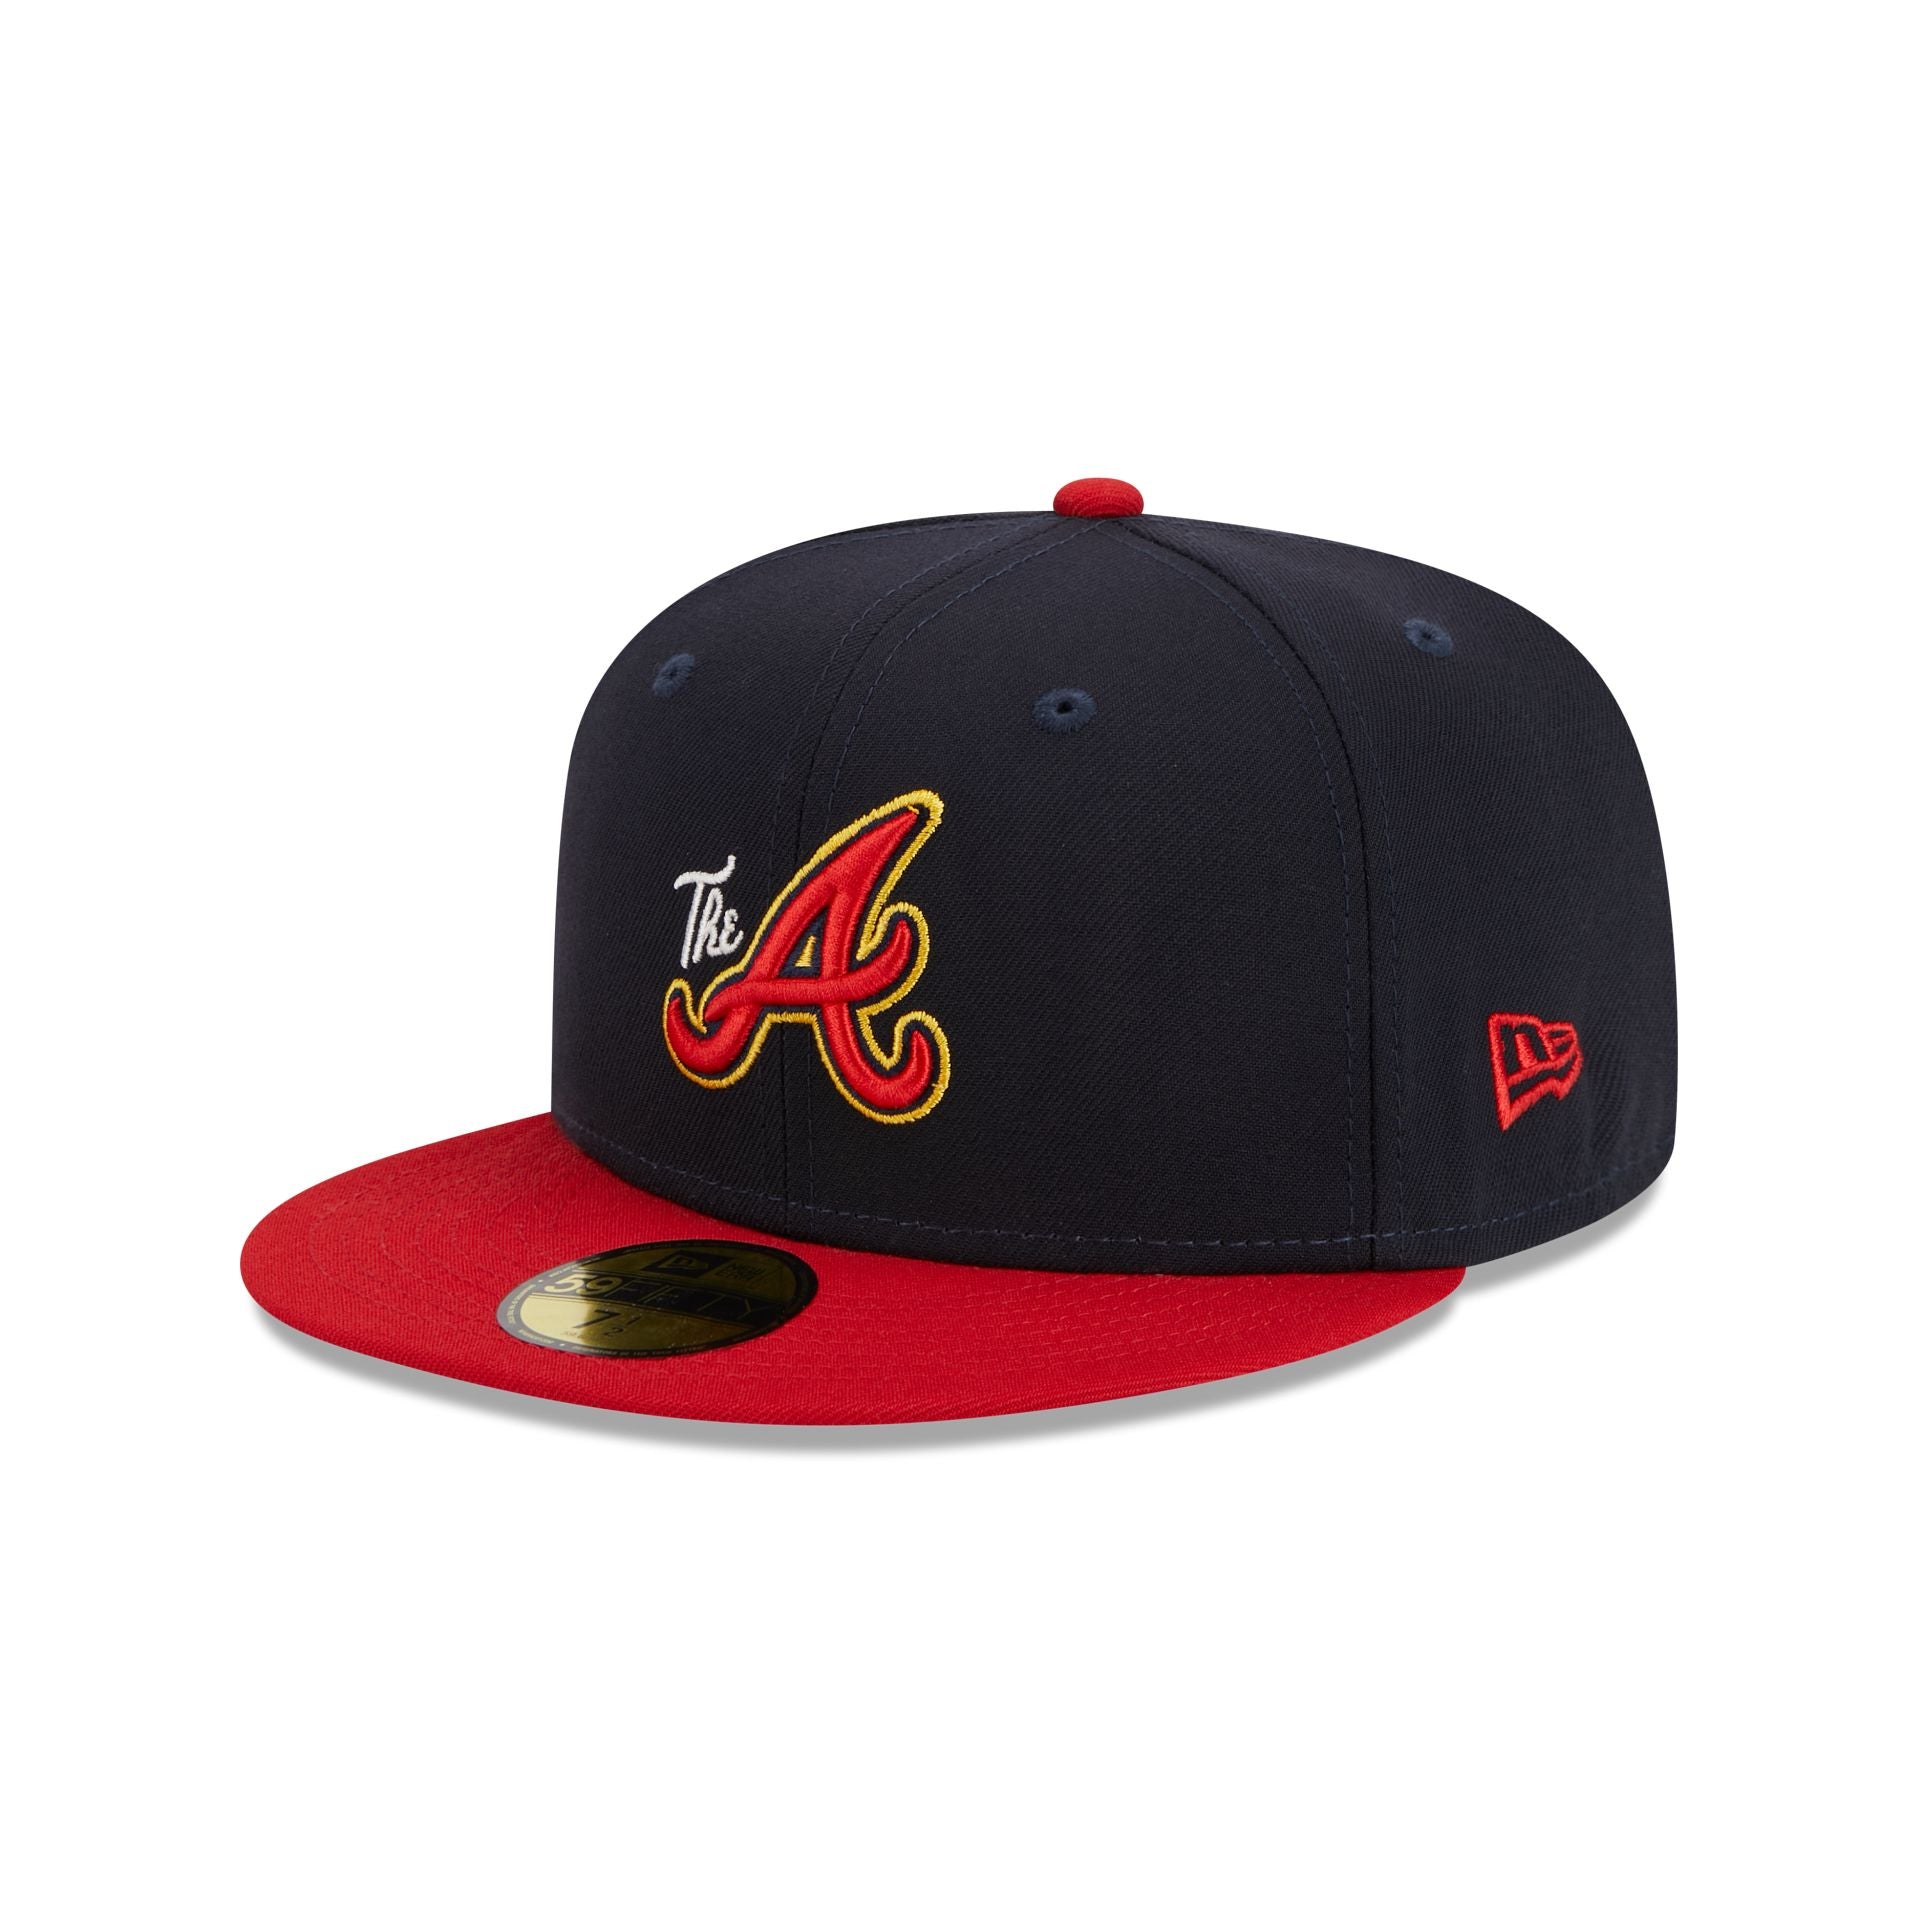 New Era Atlanta Braves Capsule Timber Collection 30th Season 59Fifty Fitted  Hat Grey/Tan Men's - US